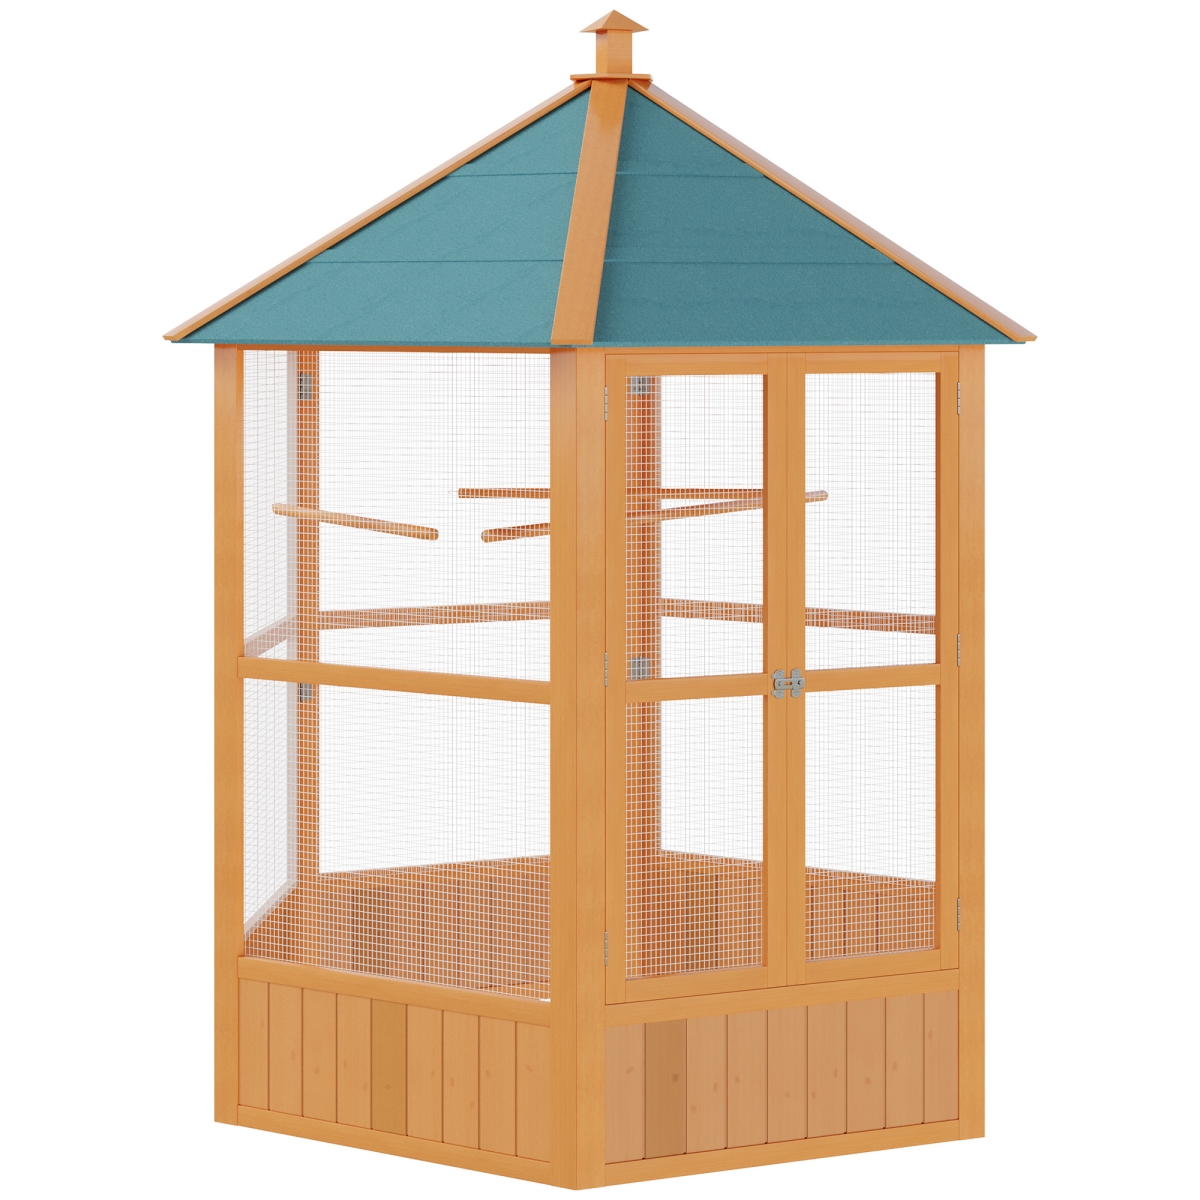 Picture of 212 Main D10-034 69 in. PawHut Large Wooden Hexagonal Outdoor Aviary Flight Bird Cage with Covered Roof